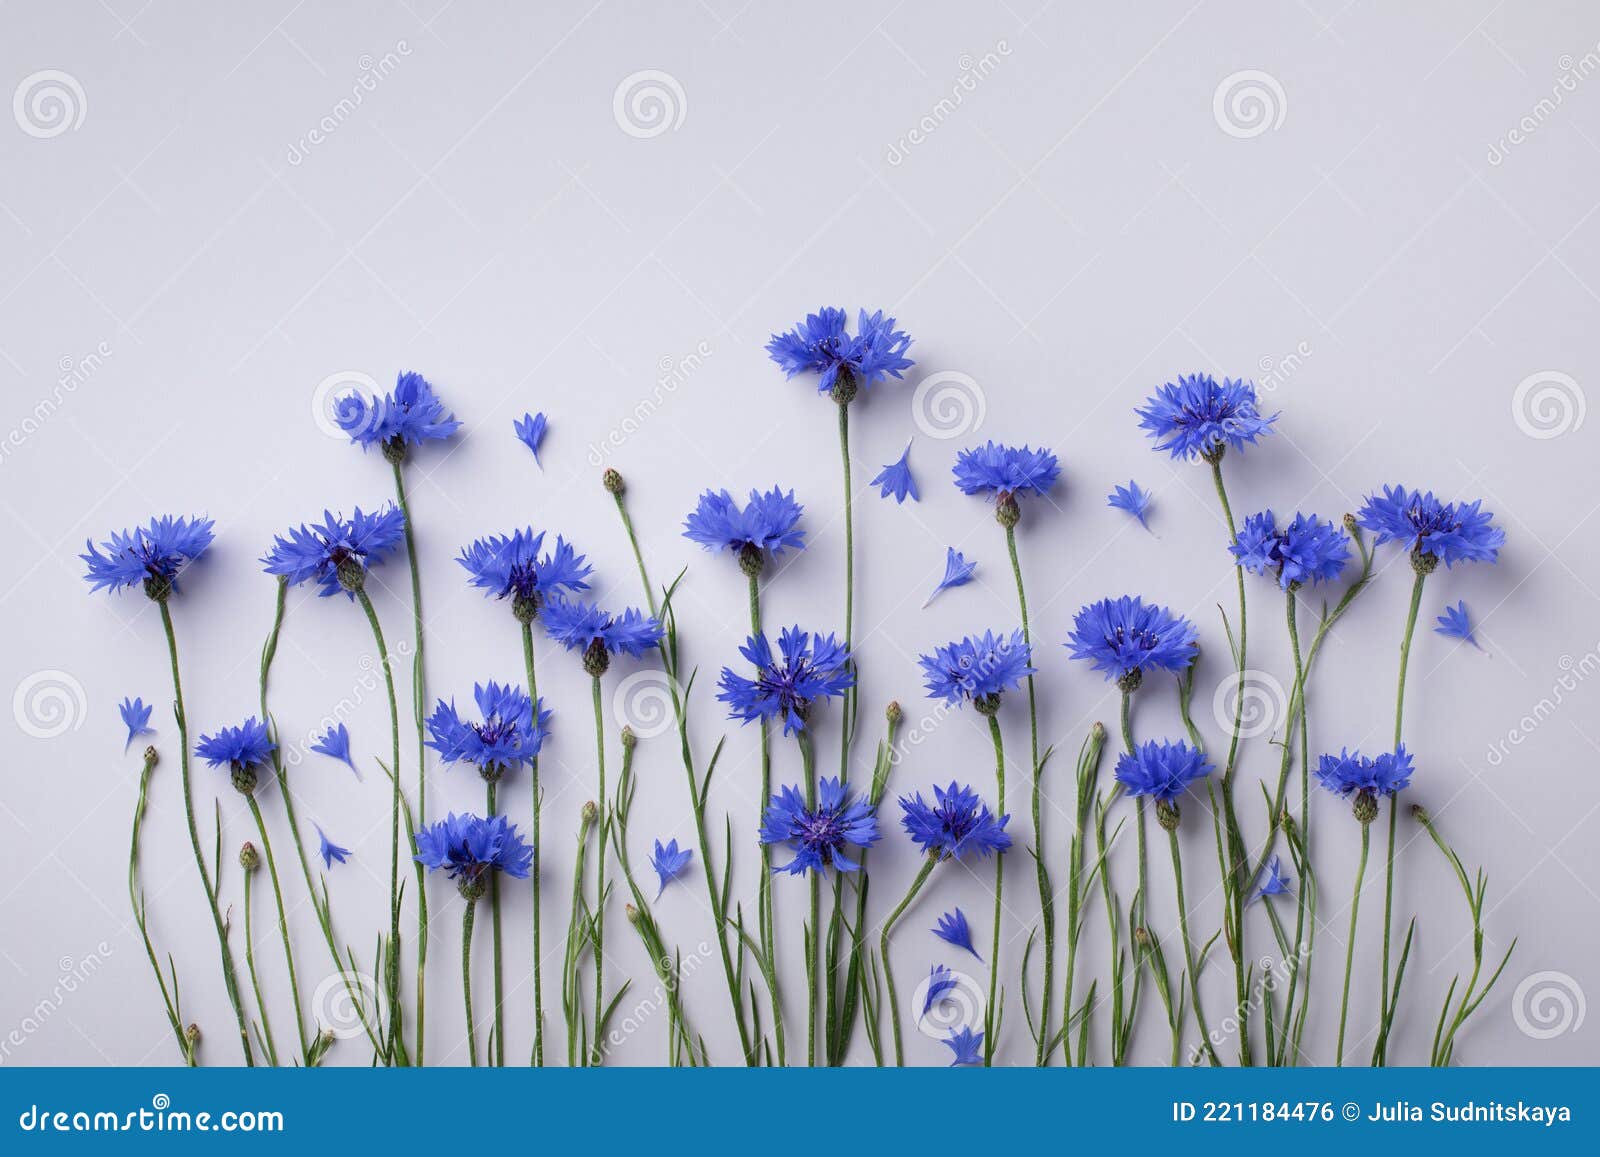 vegetative composition with flower of blue cornflowers in flat lay style and top view